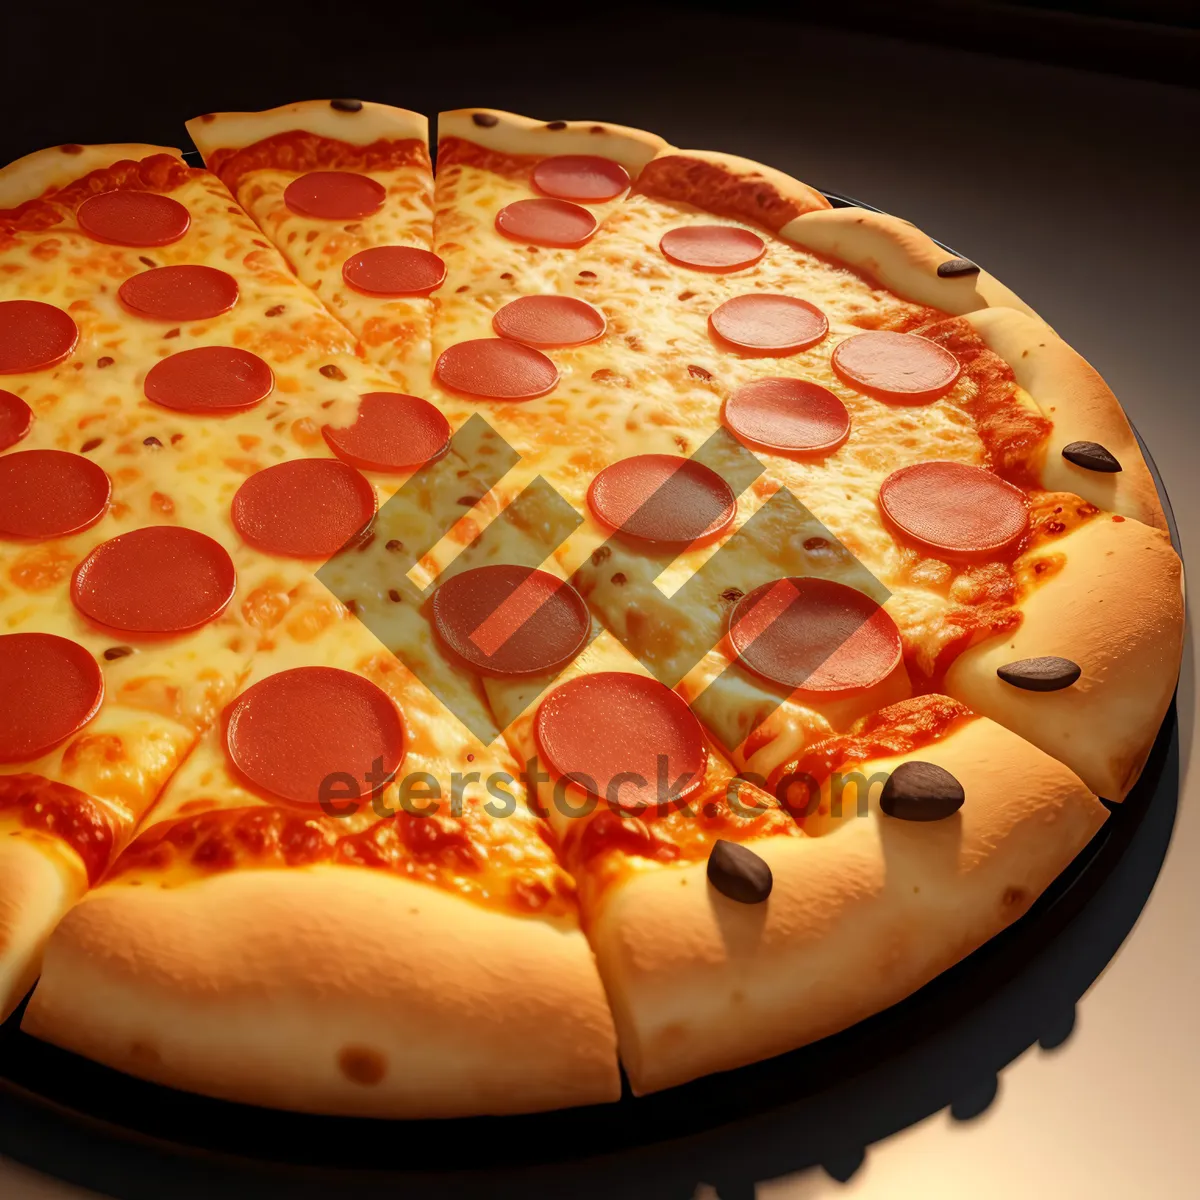 Picture of Delicious Pizza Slice with Gourmet Toppings